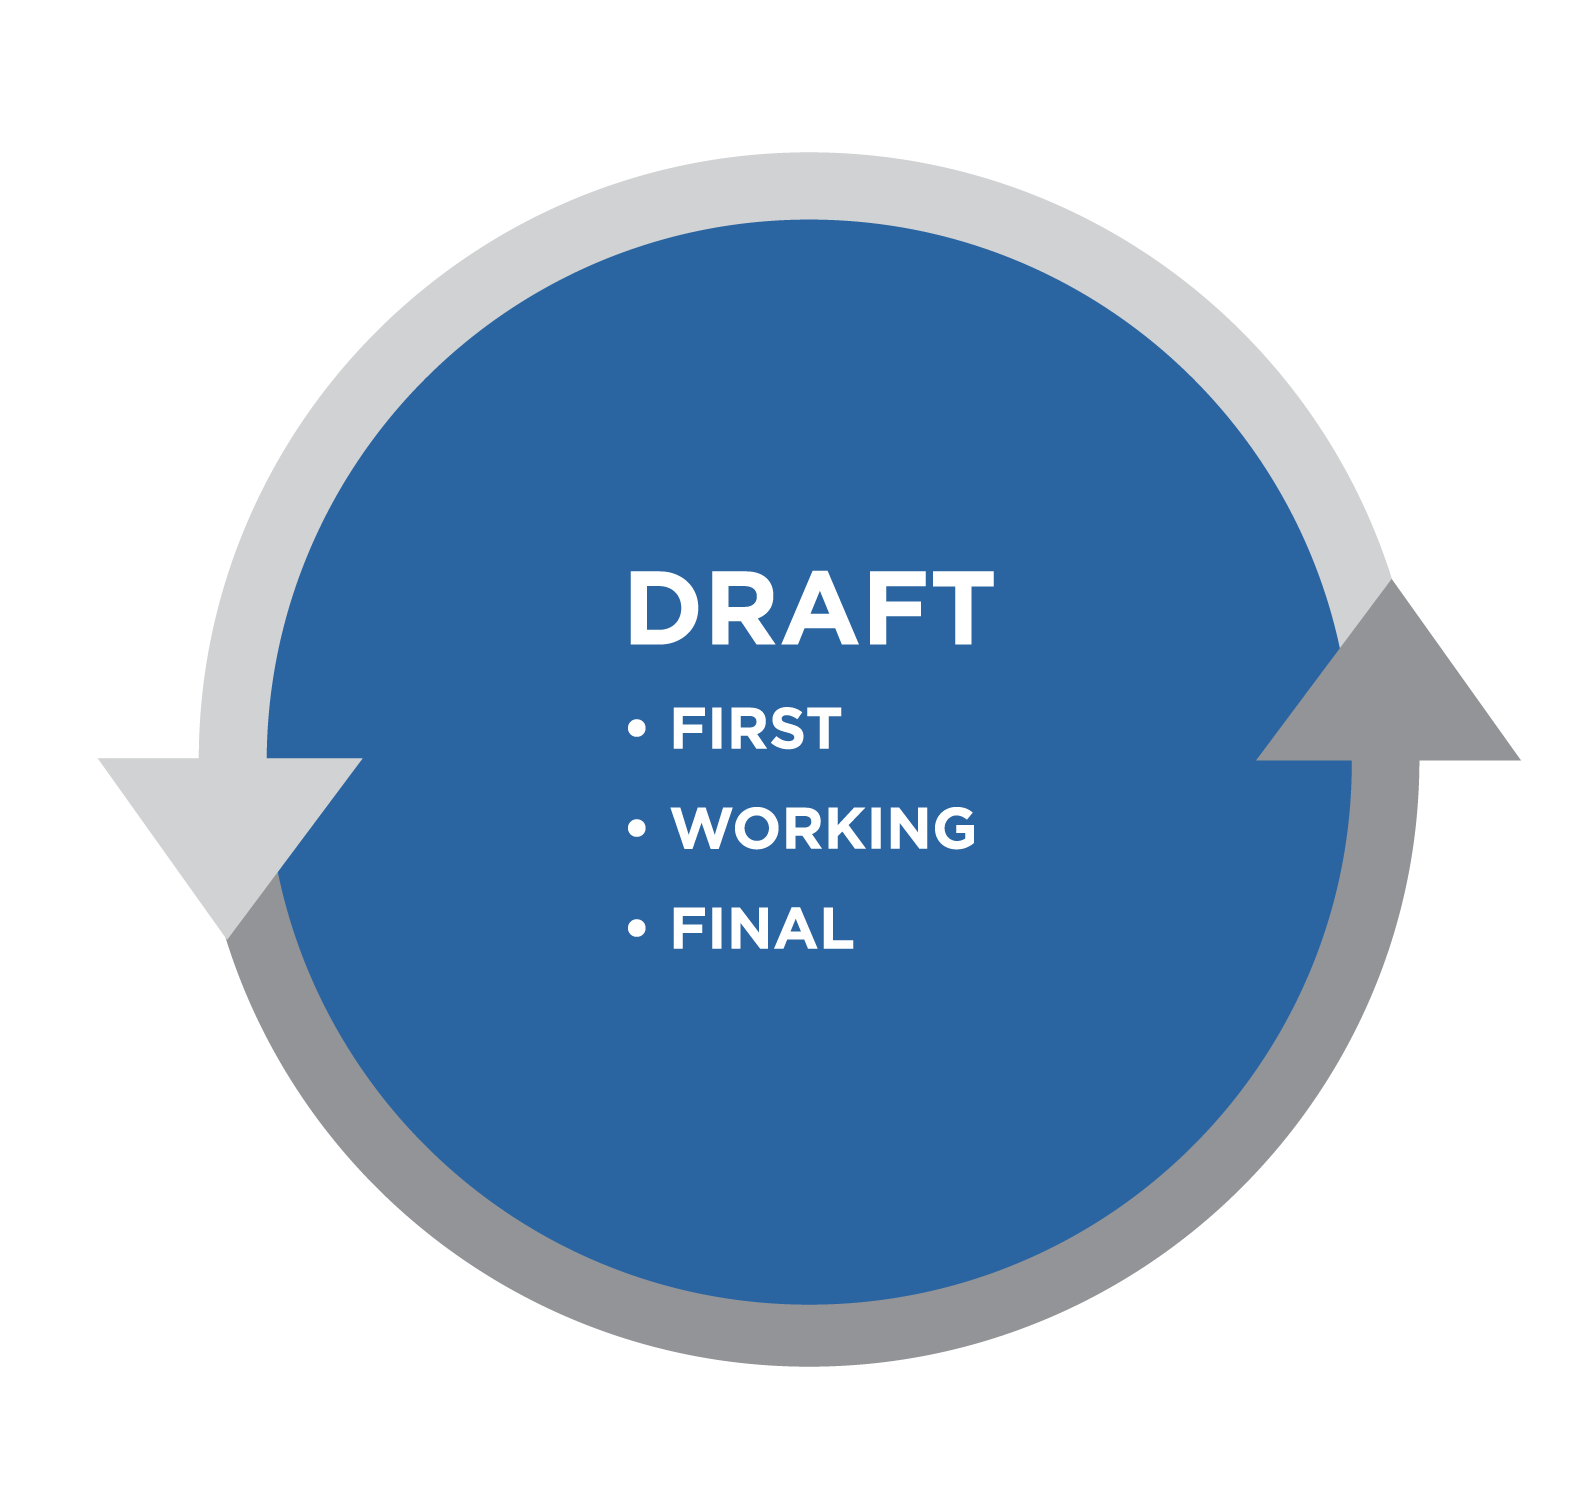 Graphic titled Draft. Bullet list: first, working, final. All is in a blue circle bordered by gray arrows.